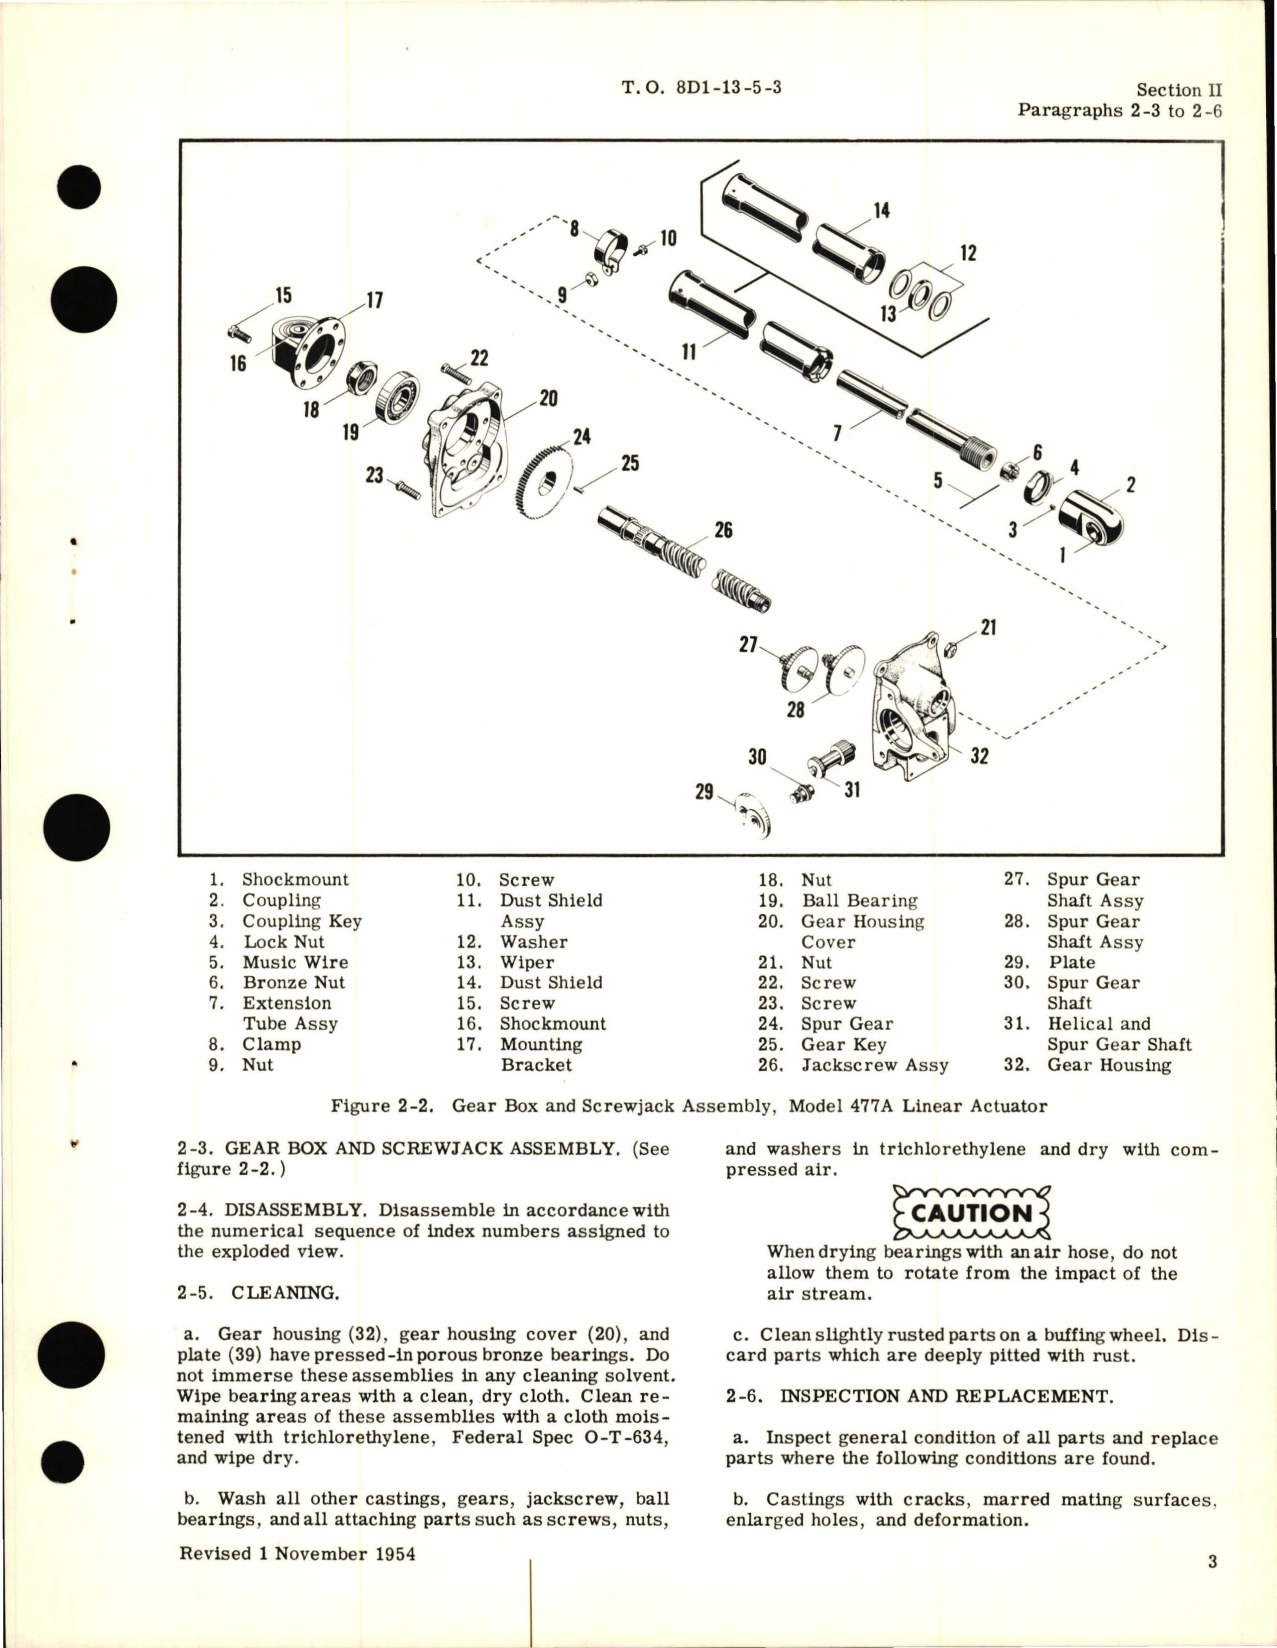 Sample page 5 from AirCorps Library document: Overhaul Instructions for Linear Actuator Assembly 477 Series